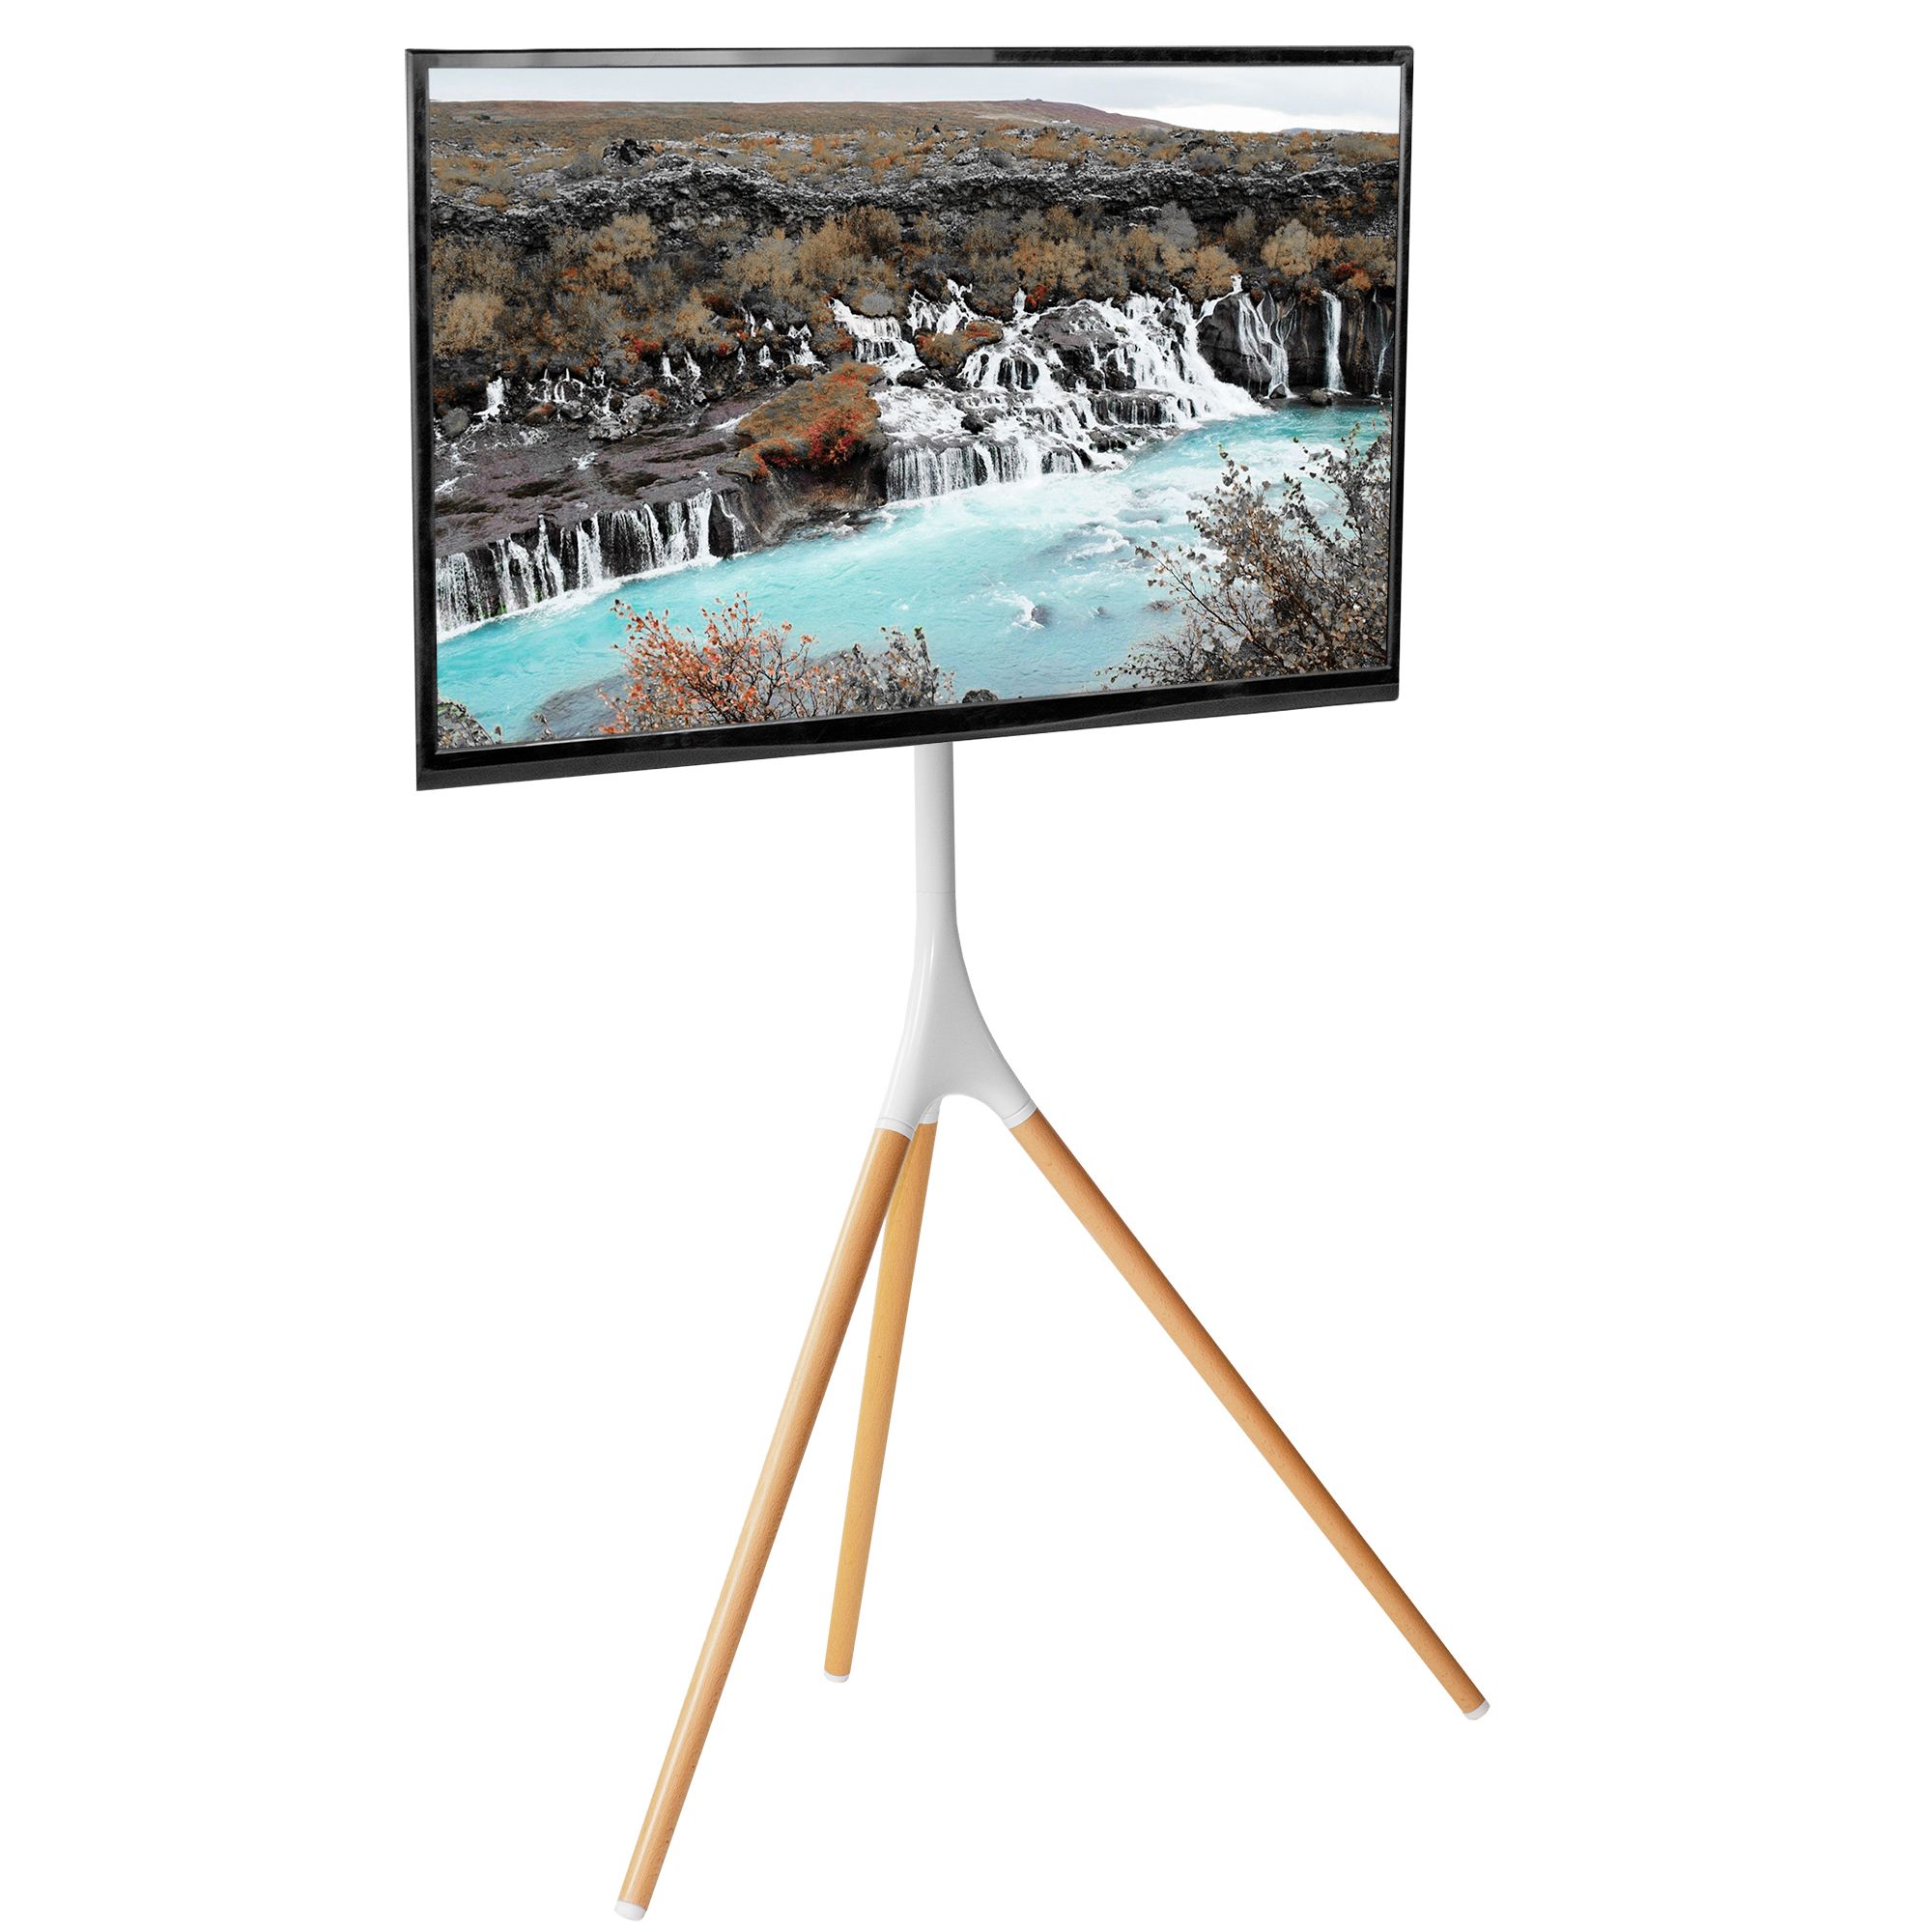 Vivo White Artistic Easel 45" To 65" Screen Tv Tripod Intended For Rfiver Universal Floor Tv Stands Base Swivel Mount With Height Adjustable Cable Management (View 18 of 20)